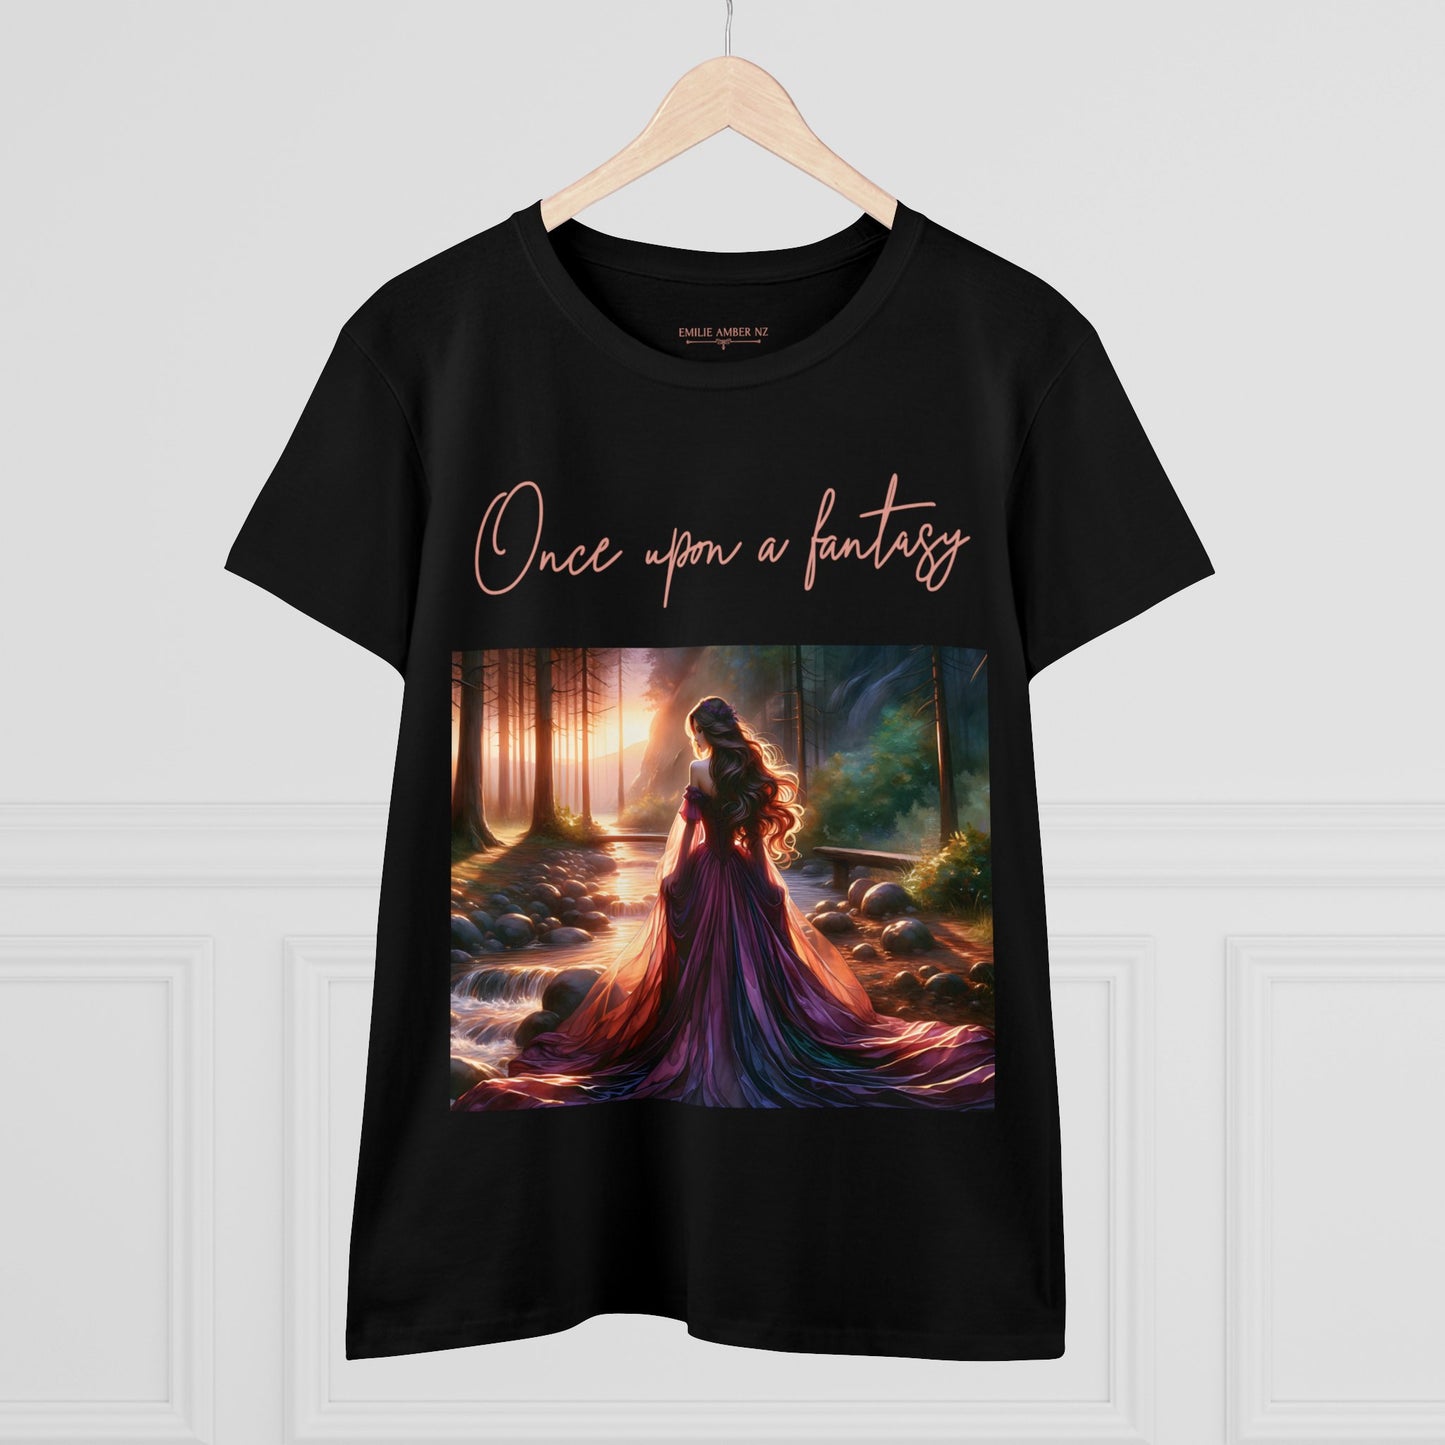 Once Upon A Fantasy - River Maiden Woman's Cotton T-Shirt